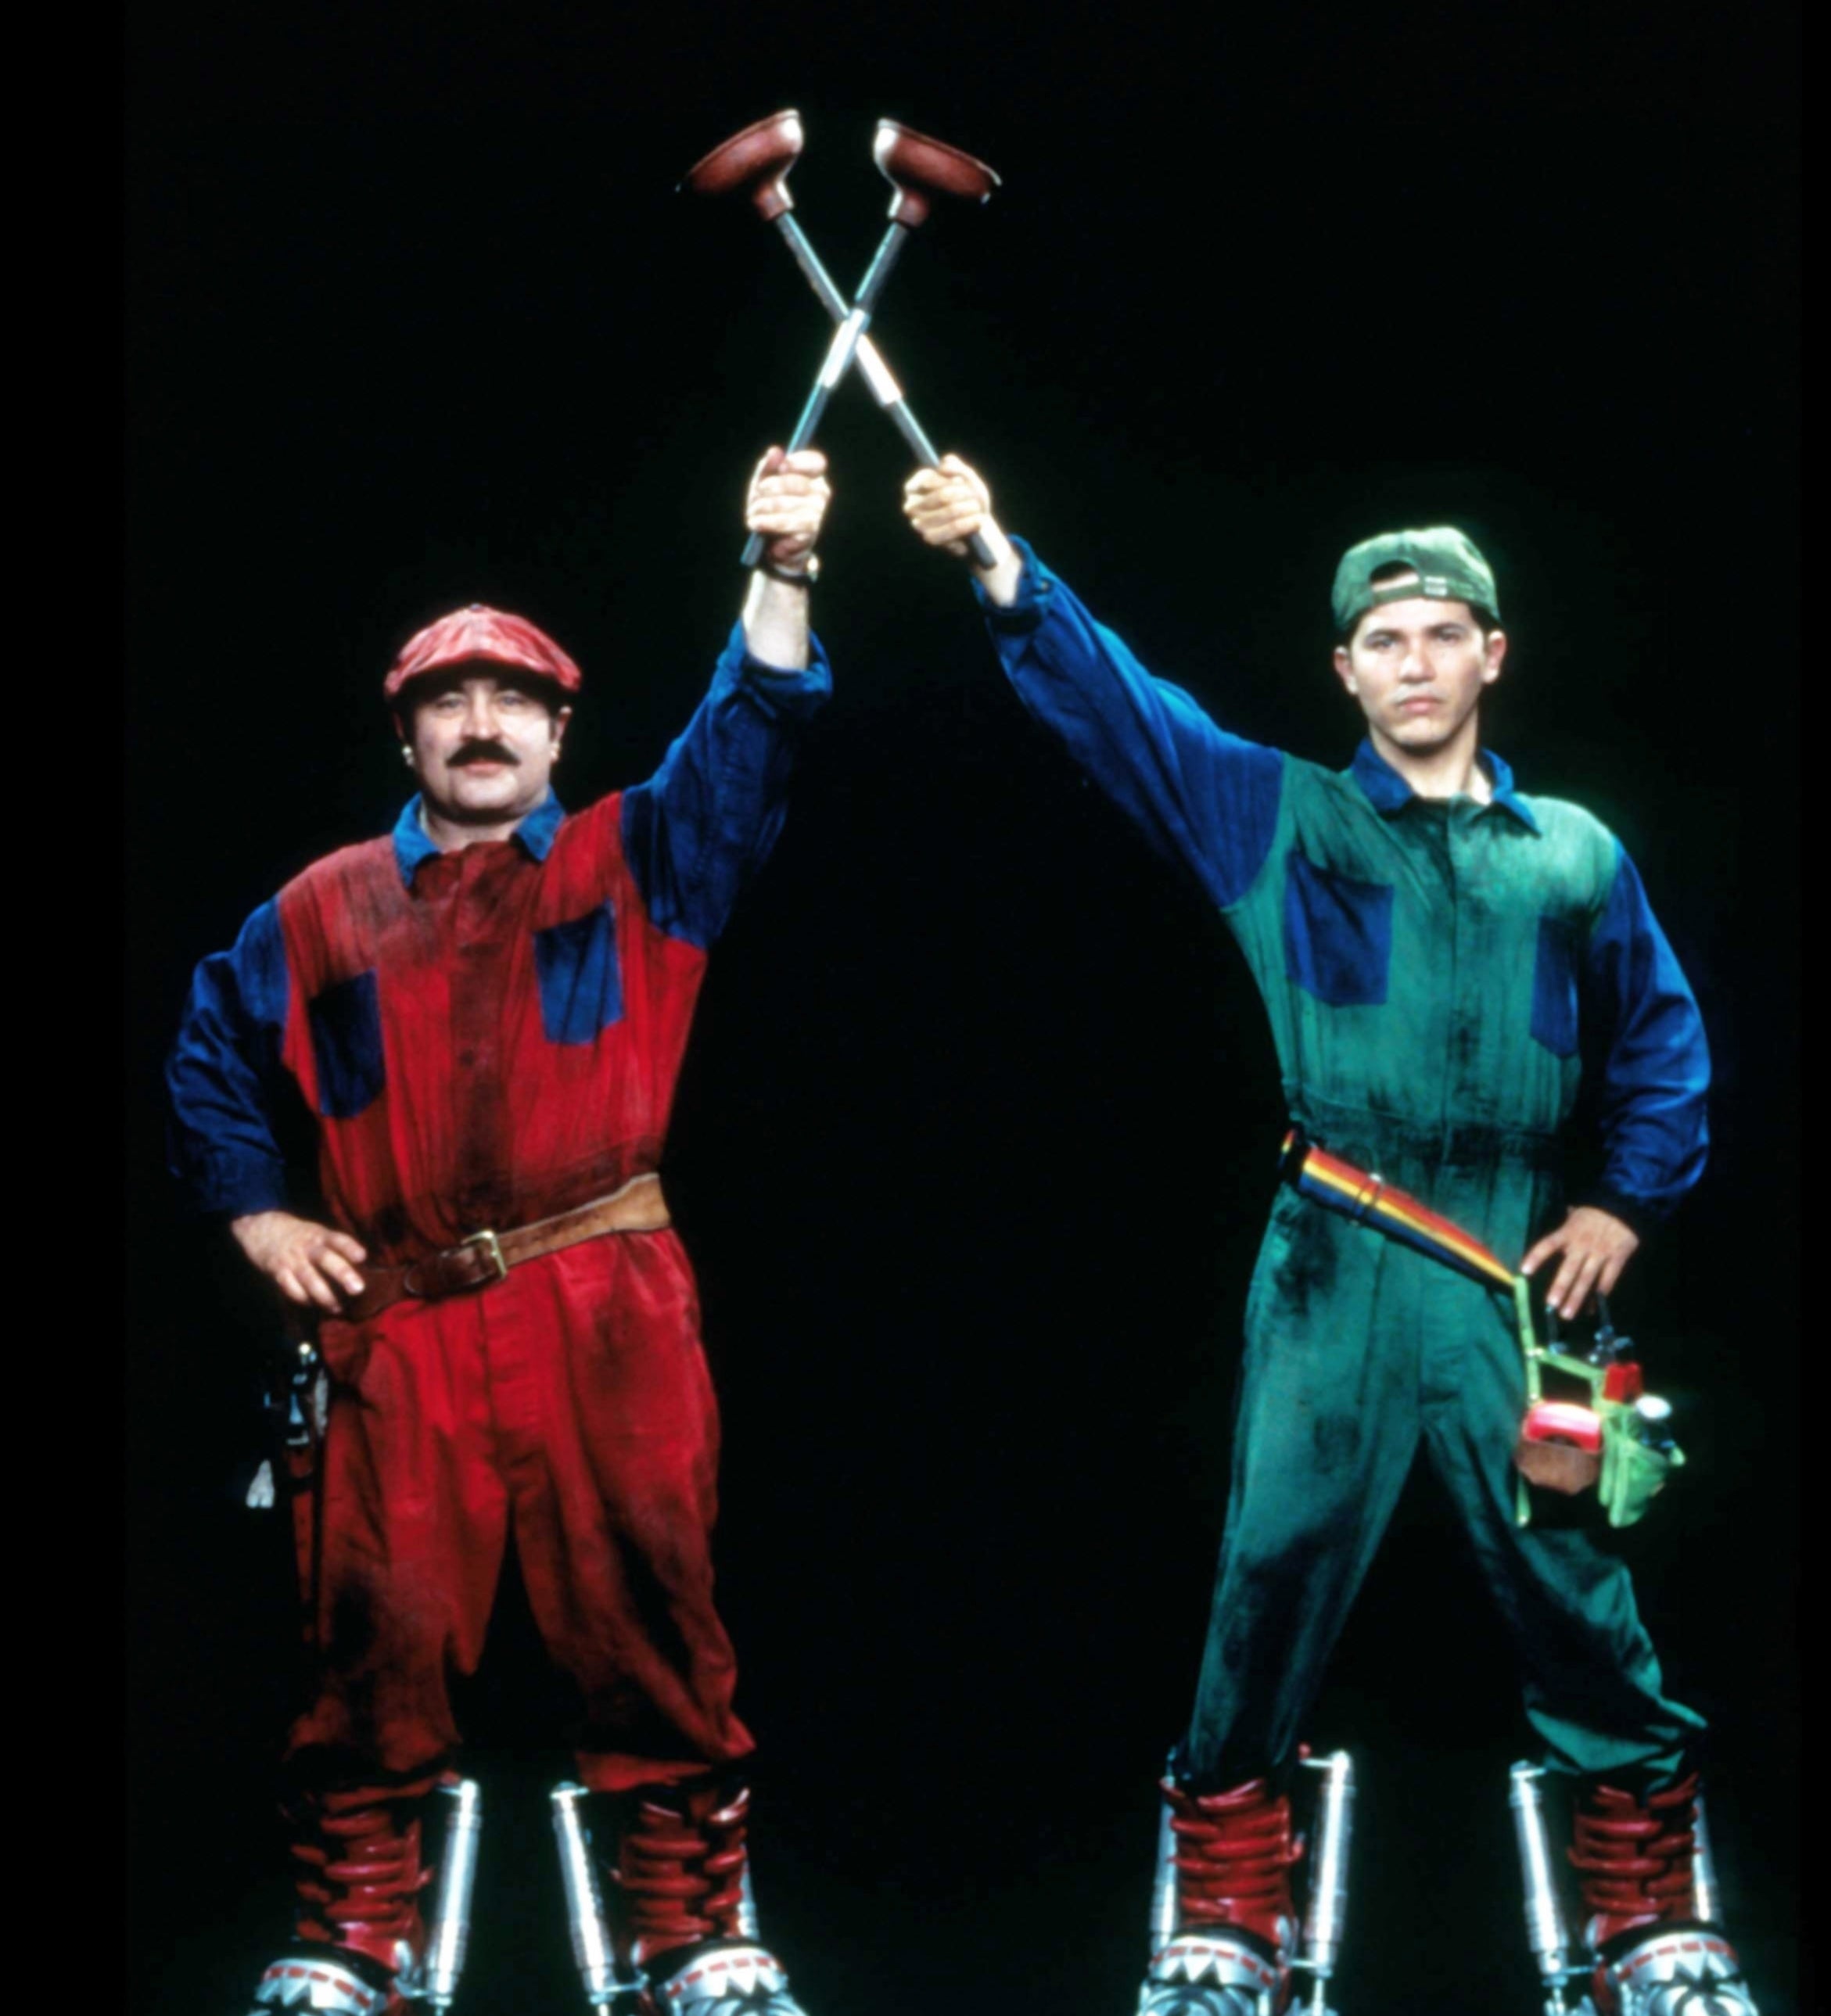 Mario and Luigi from the Super Mario Bros film, wearing their iconic costumes and holding plumber tools